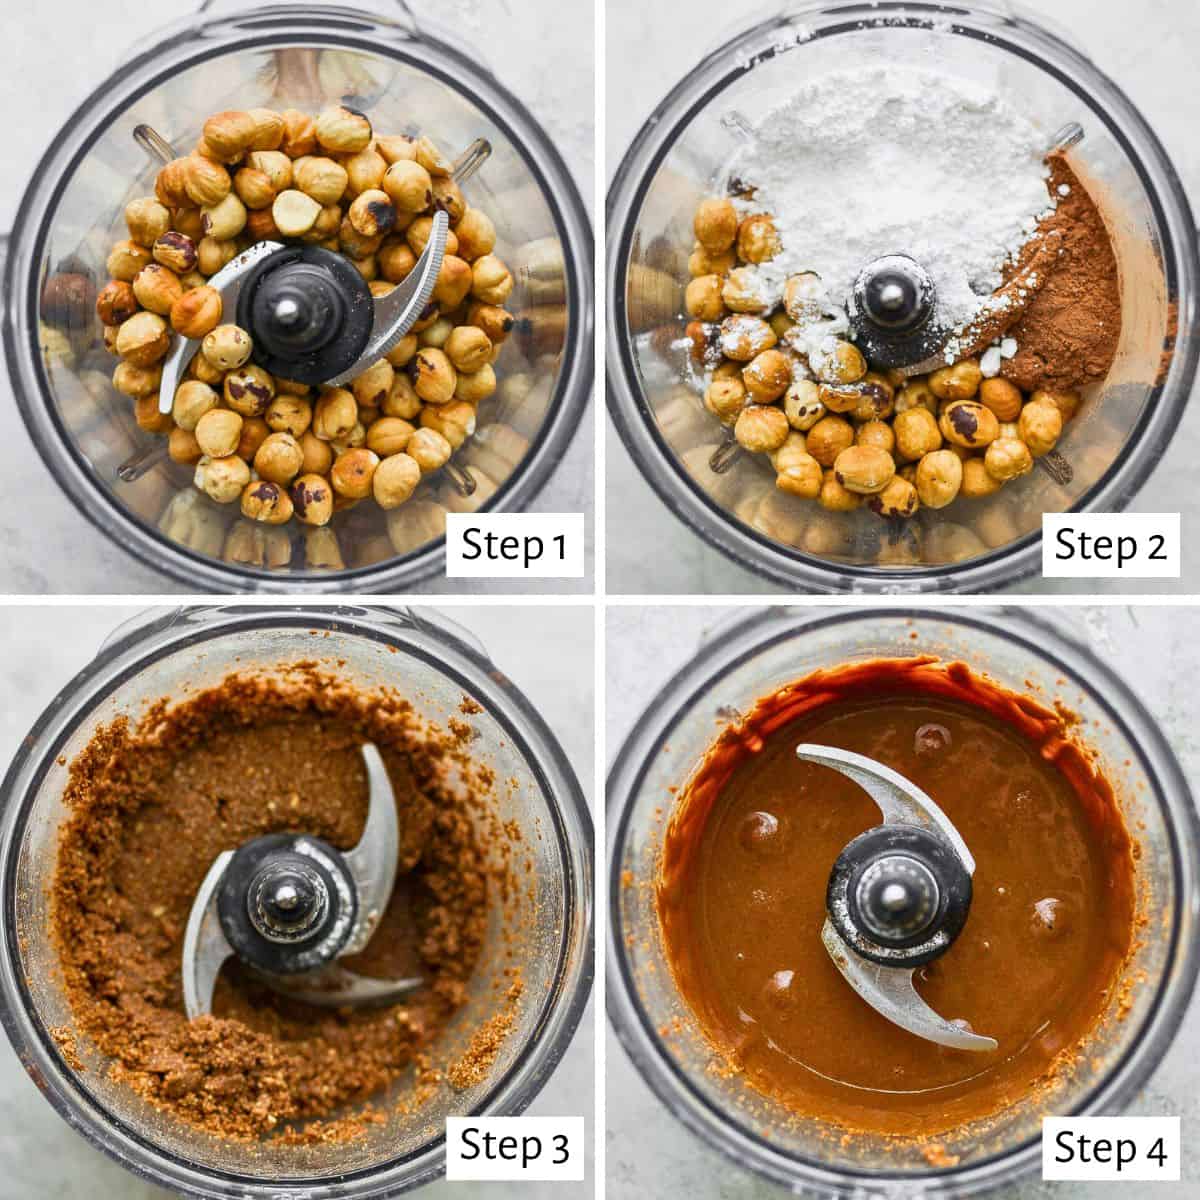 4 photos in collage to show the steps for blending the ingredients to make the spread in a food processor